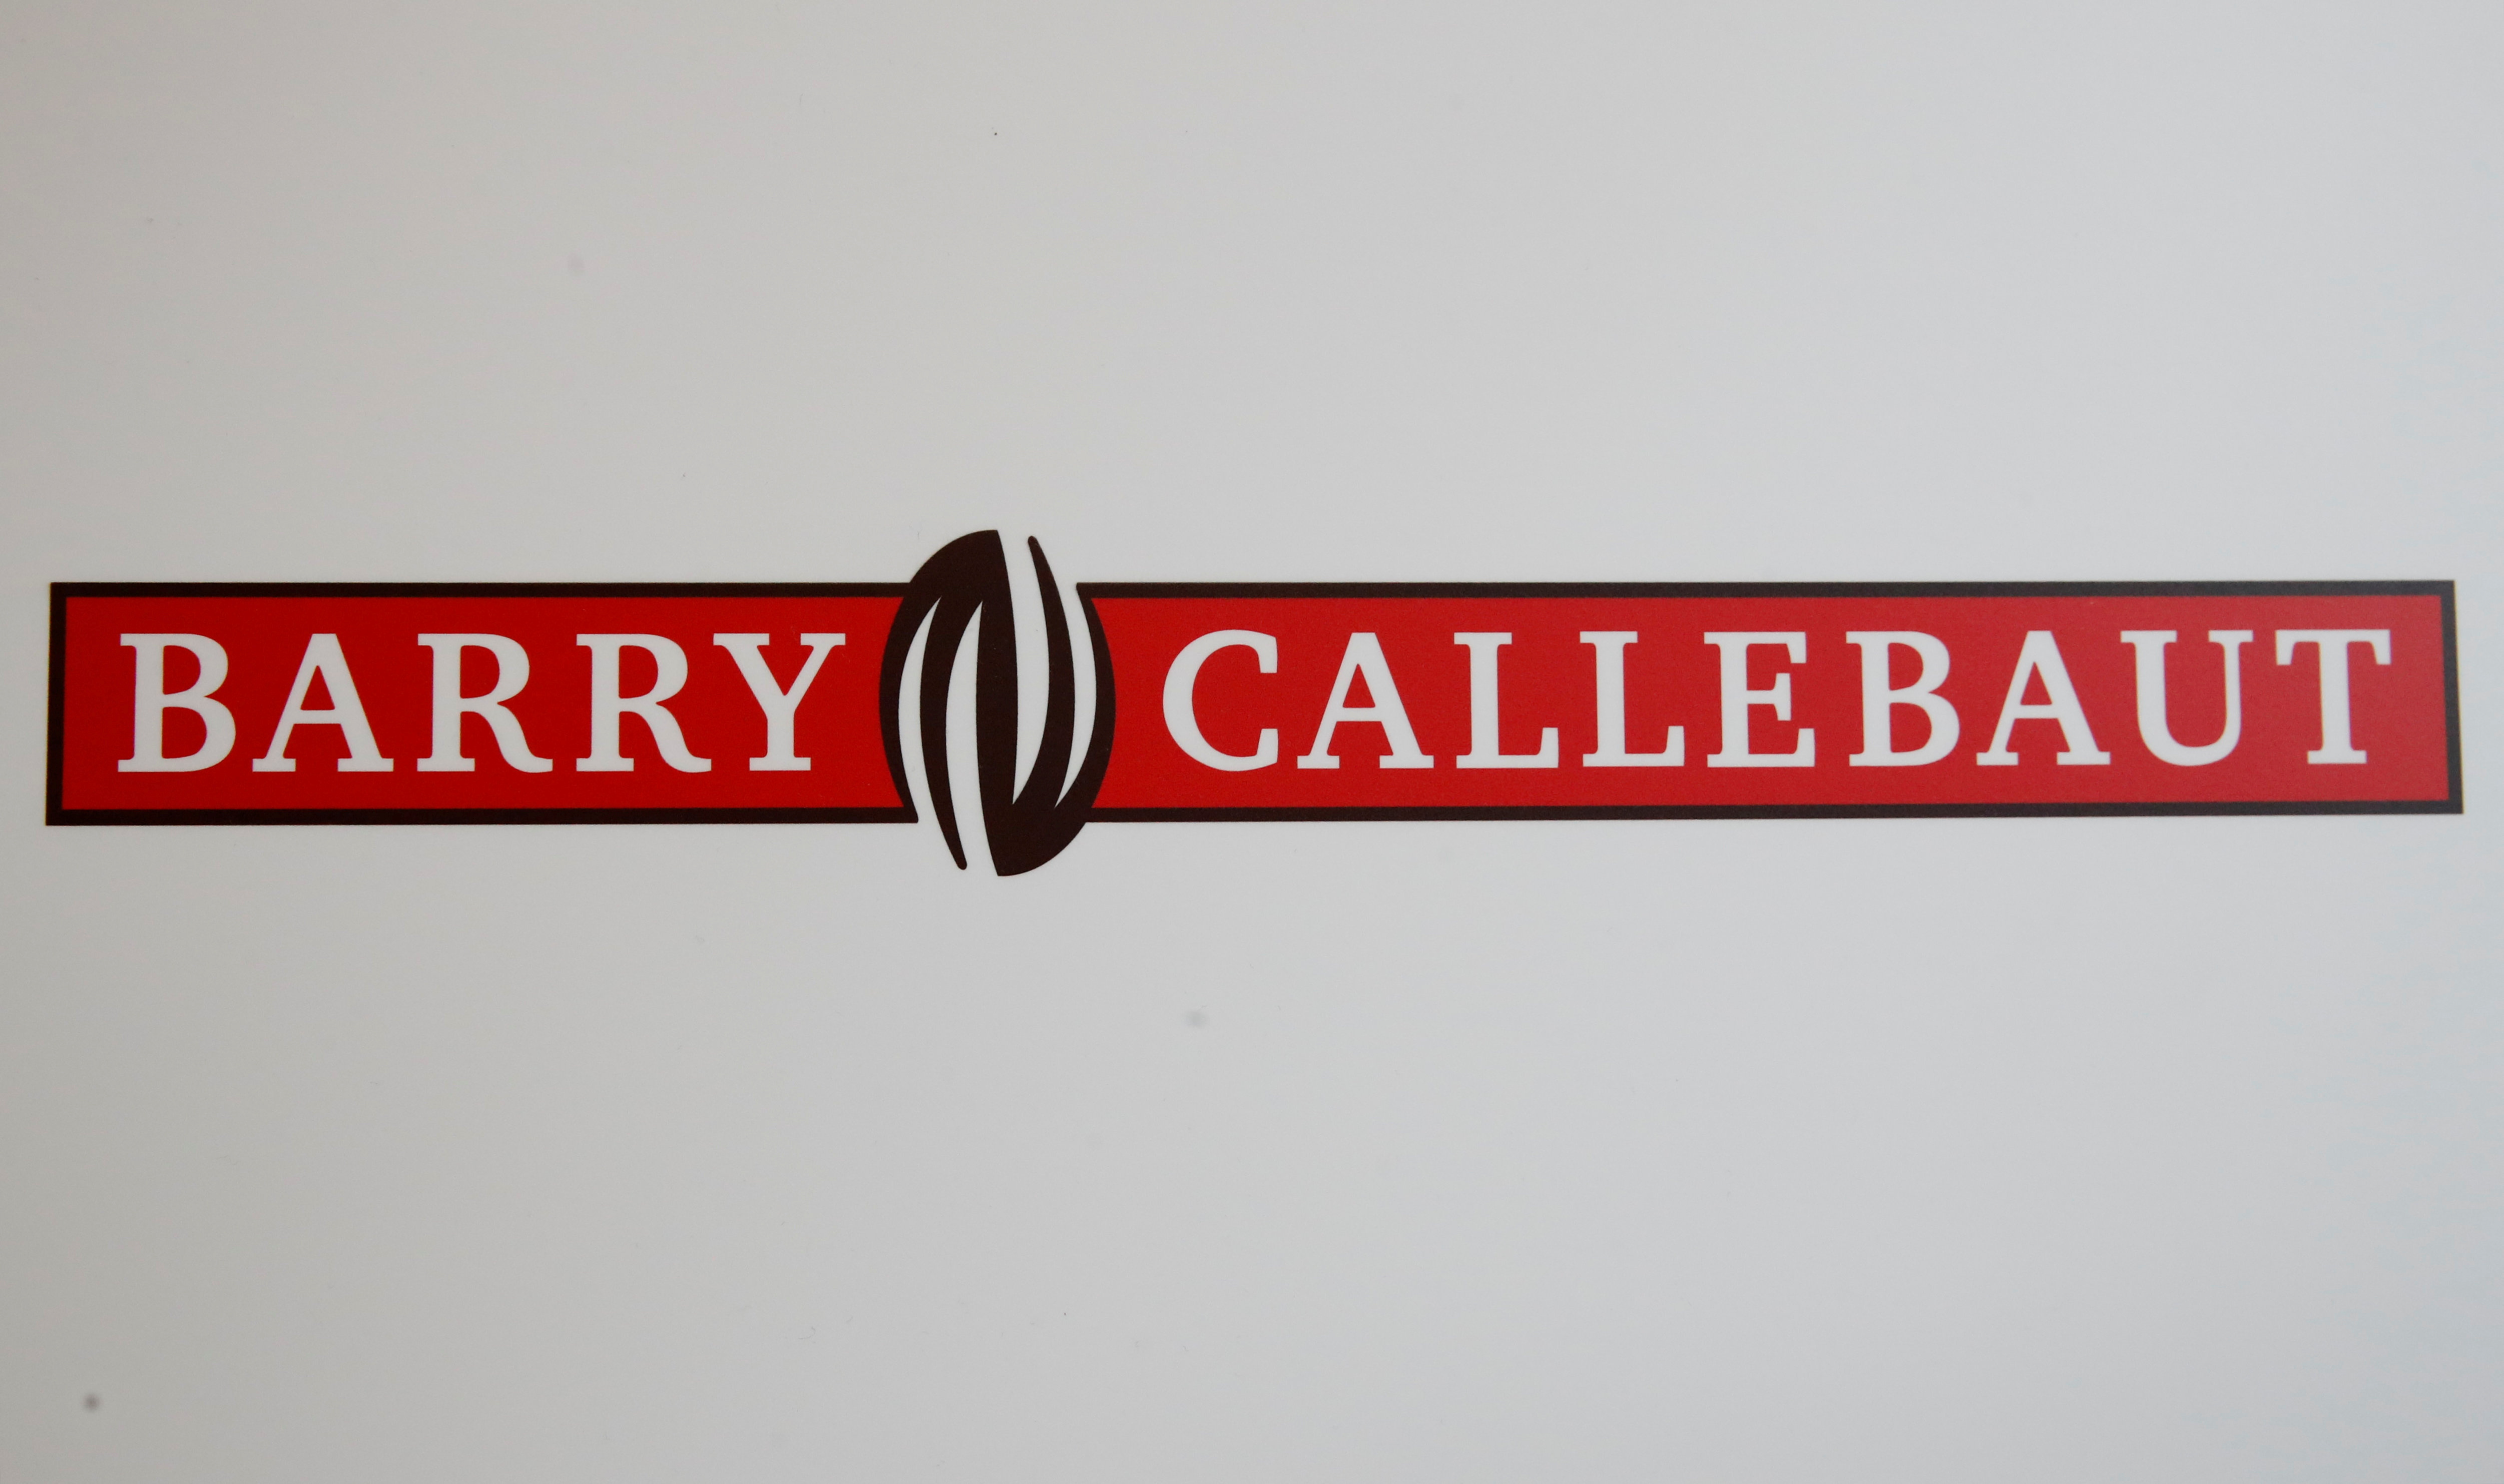 The logo of chocolate and cocoa product maker Barry Callebaut is pictured during the company's annual news conference in Zurich, Switzerland November 7, 2018. REUTERS/Arnd Wiegmann/File Photo